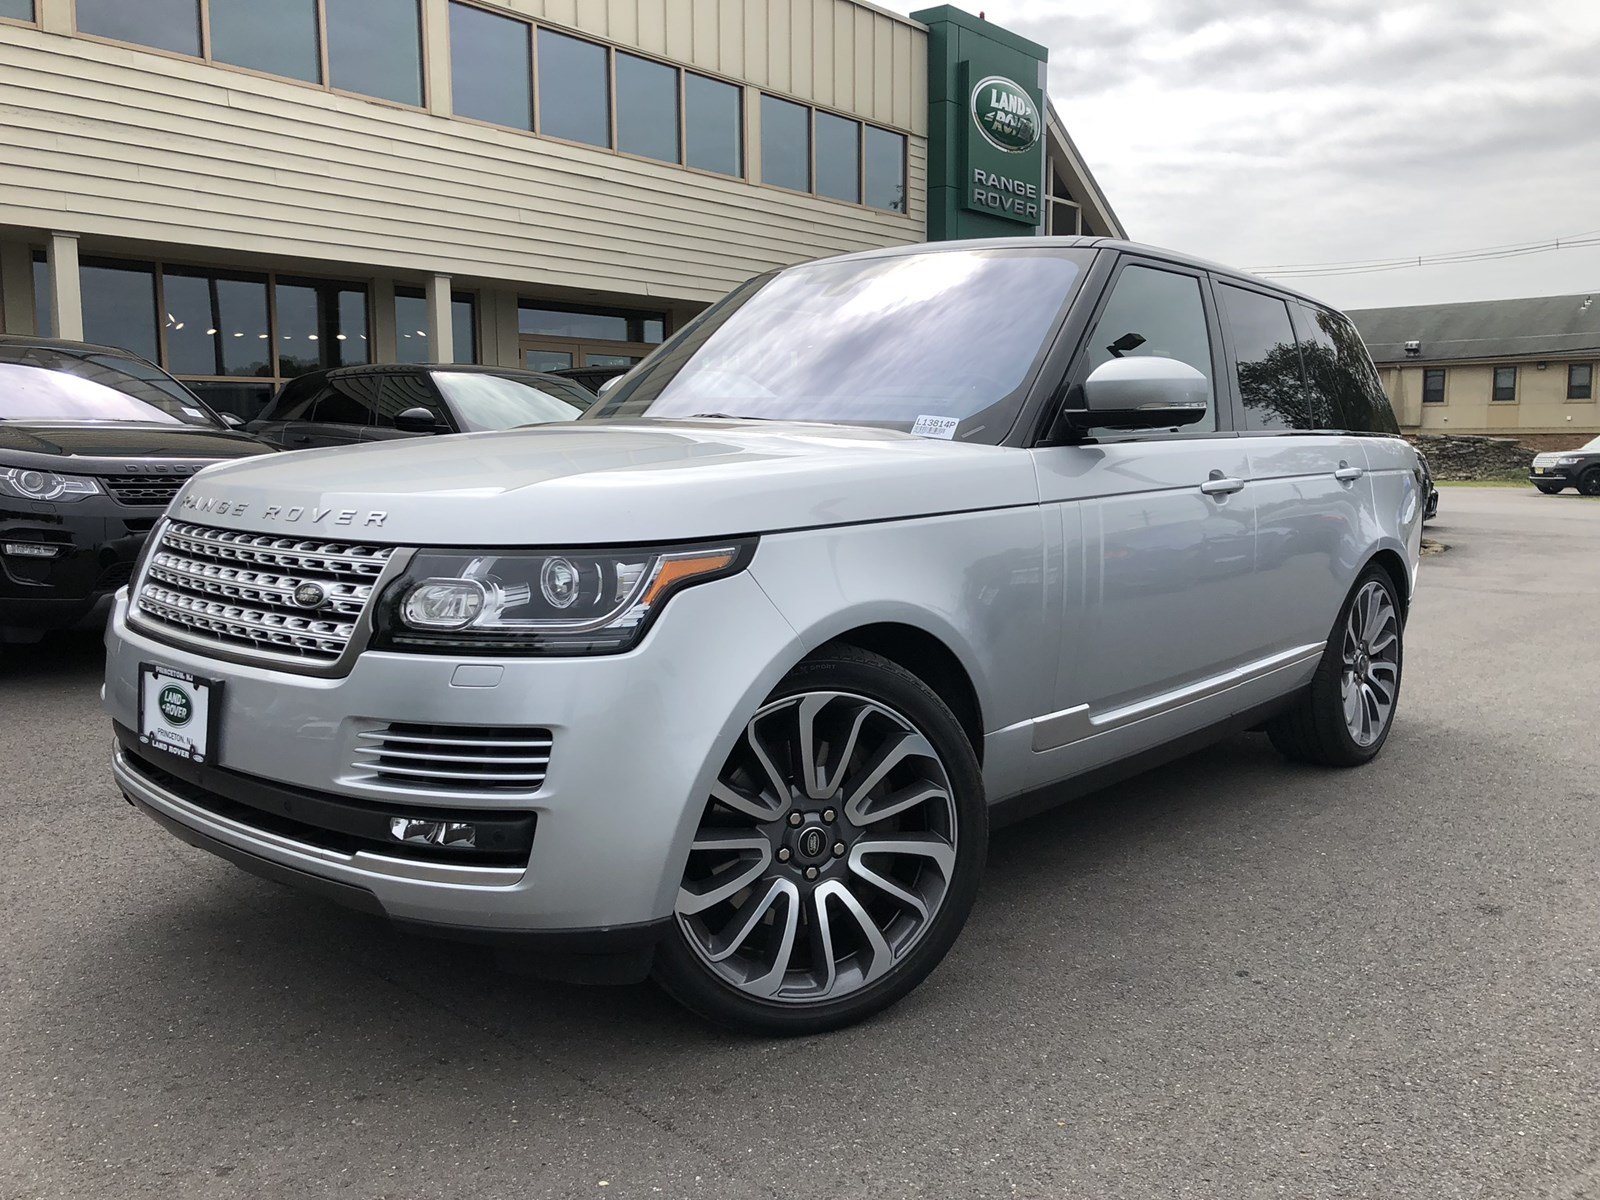 Pre-Owned 2016 Land Rover Range Rover Supercharged 4 door in Princeton ...